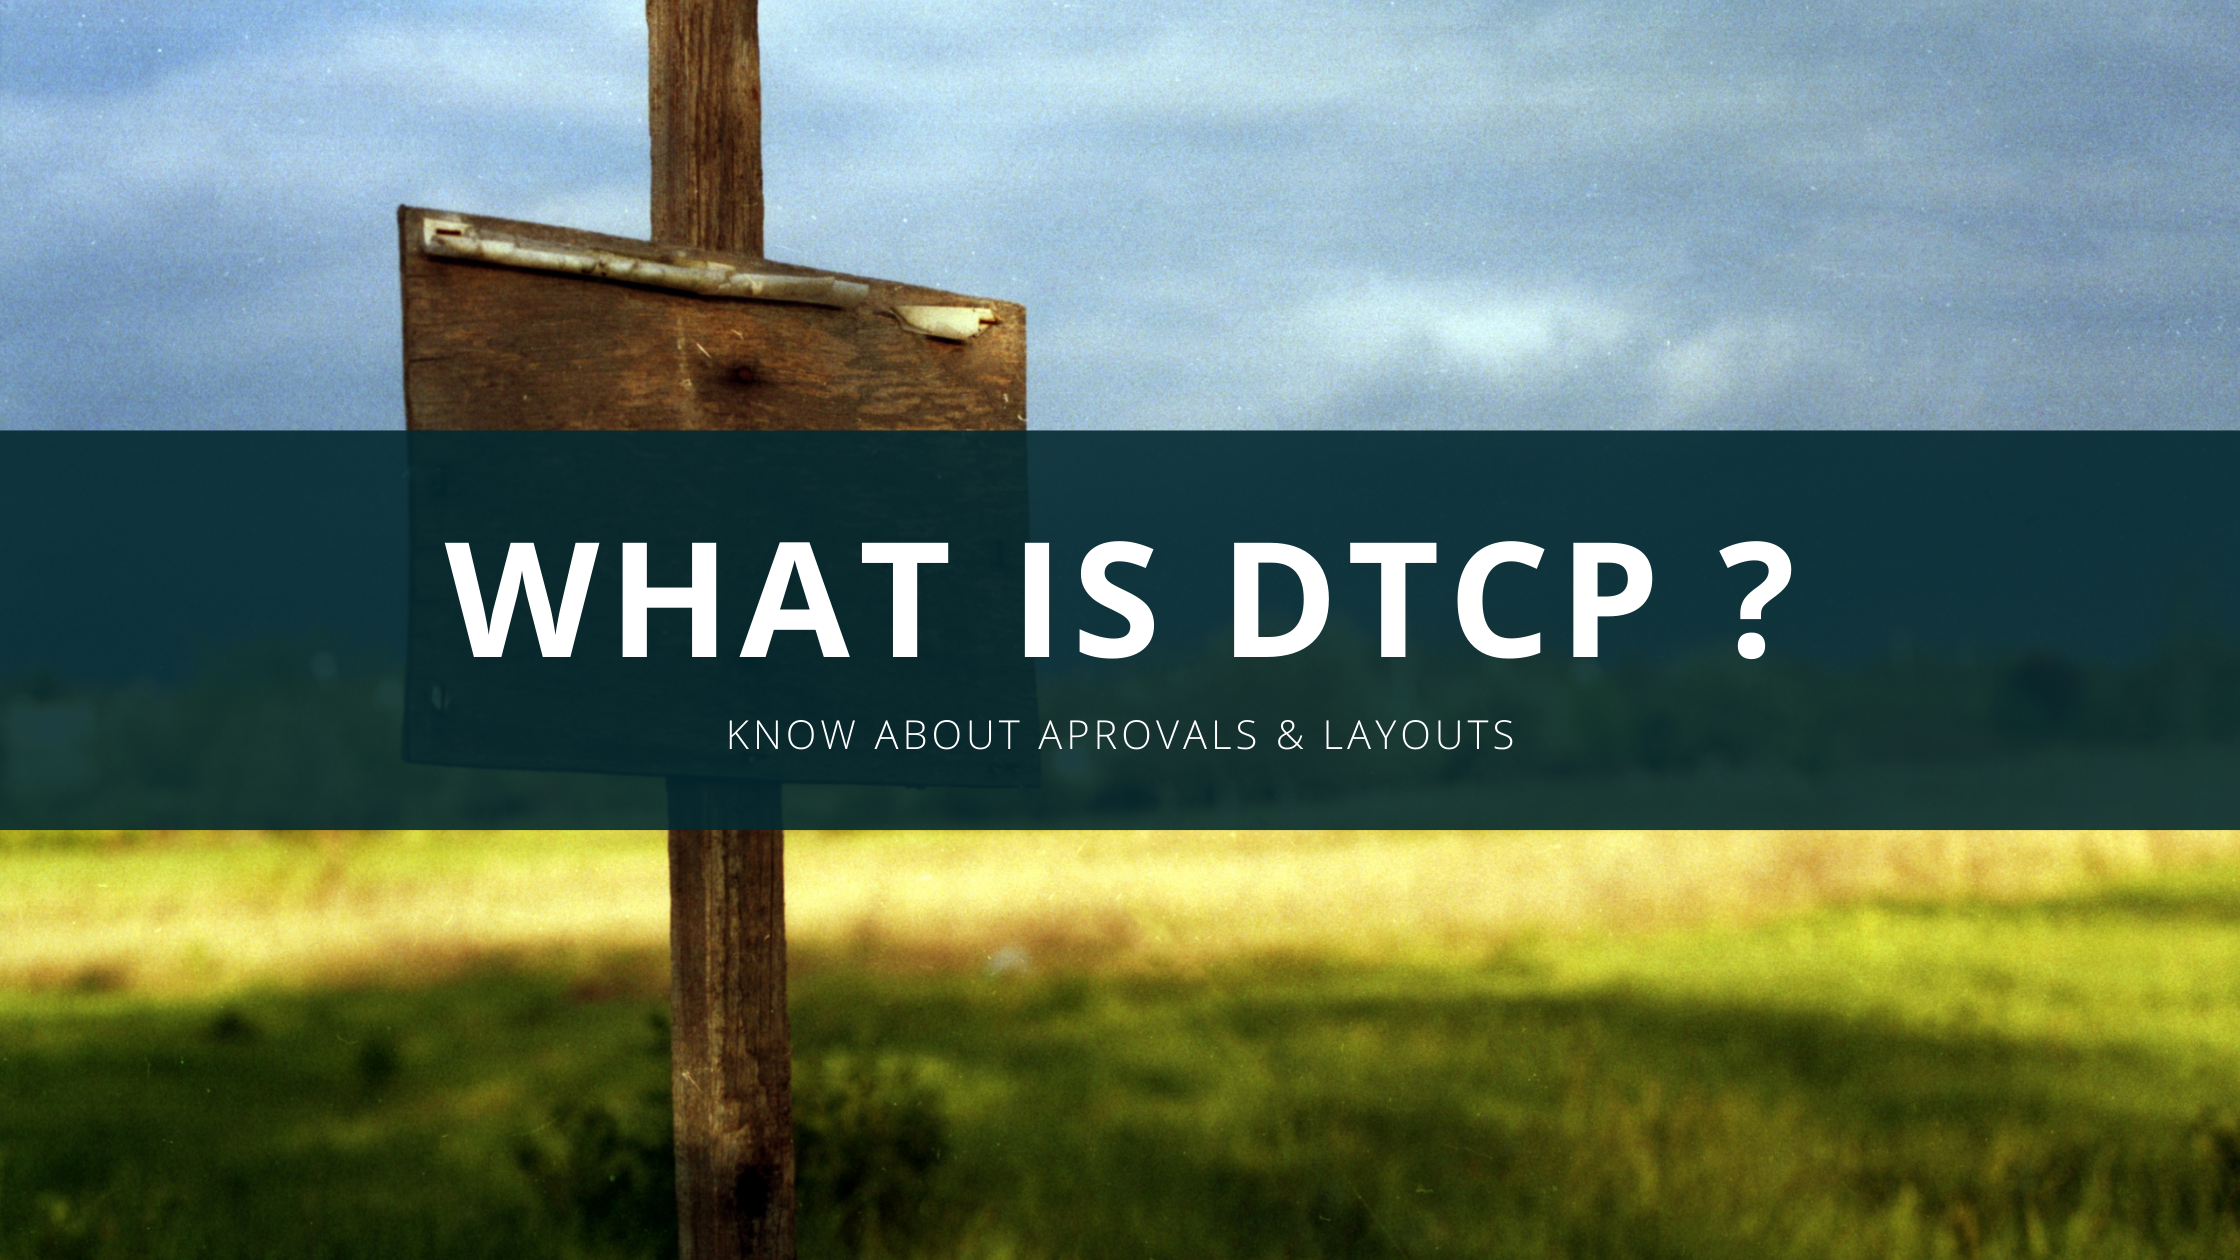 What Is DTCP Layout & DTCP Approval   June 20